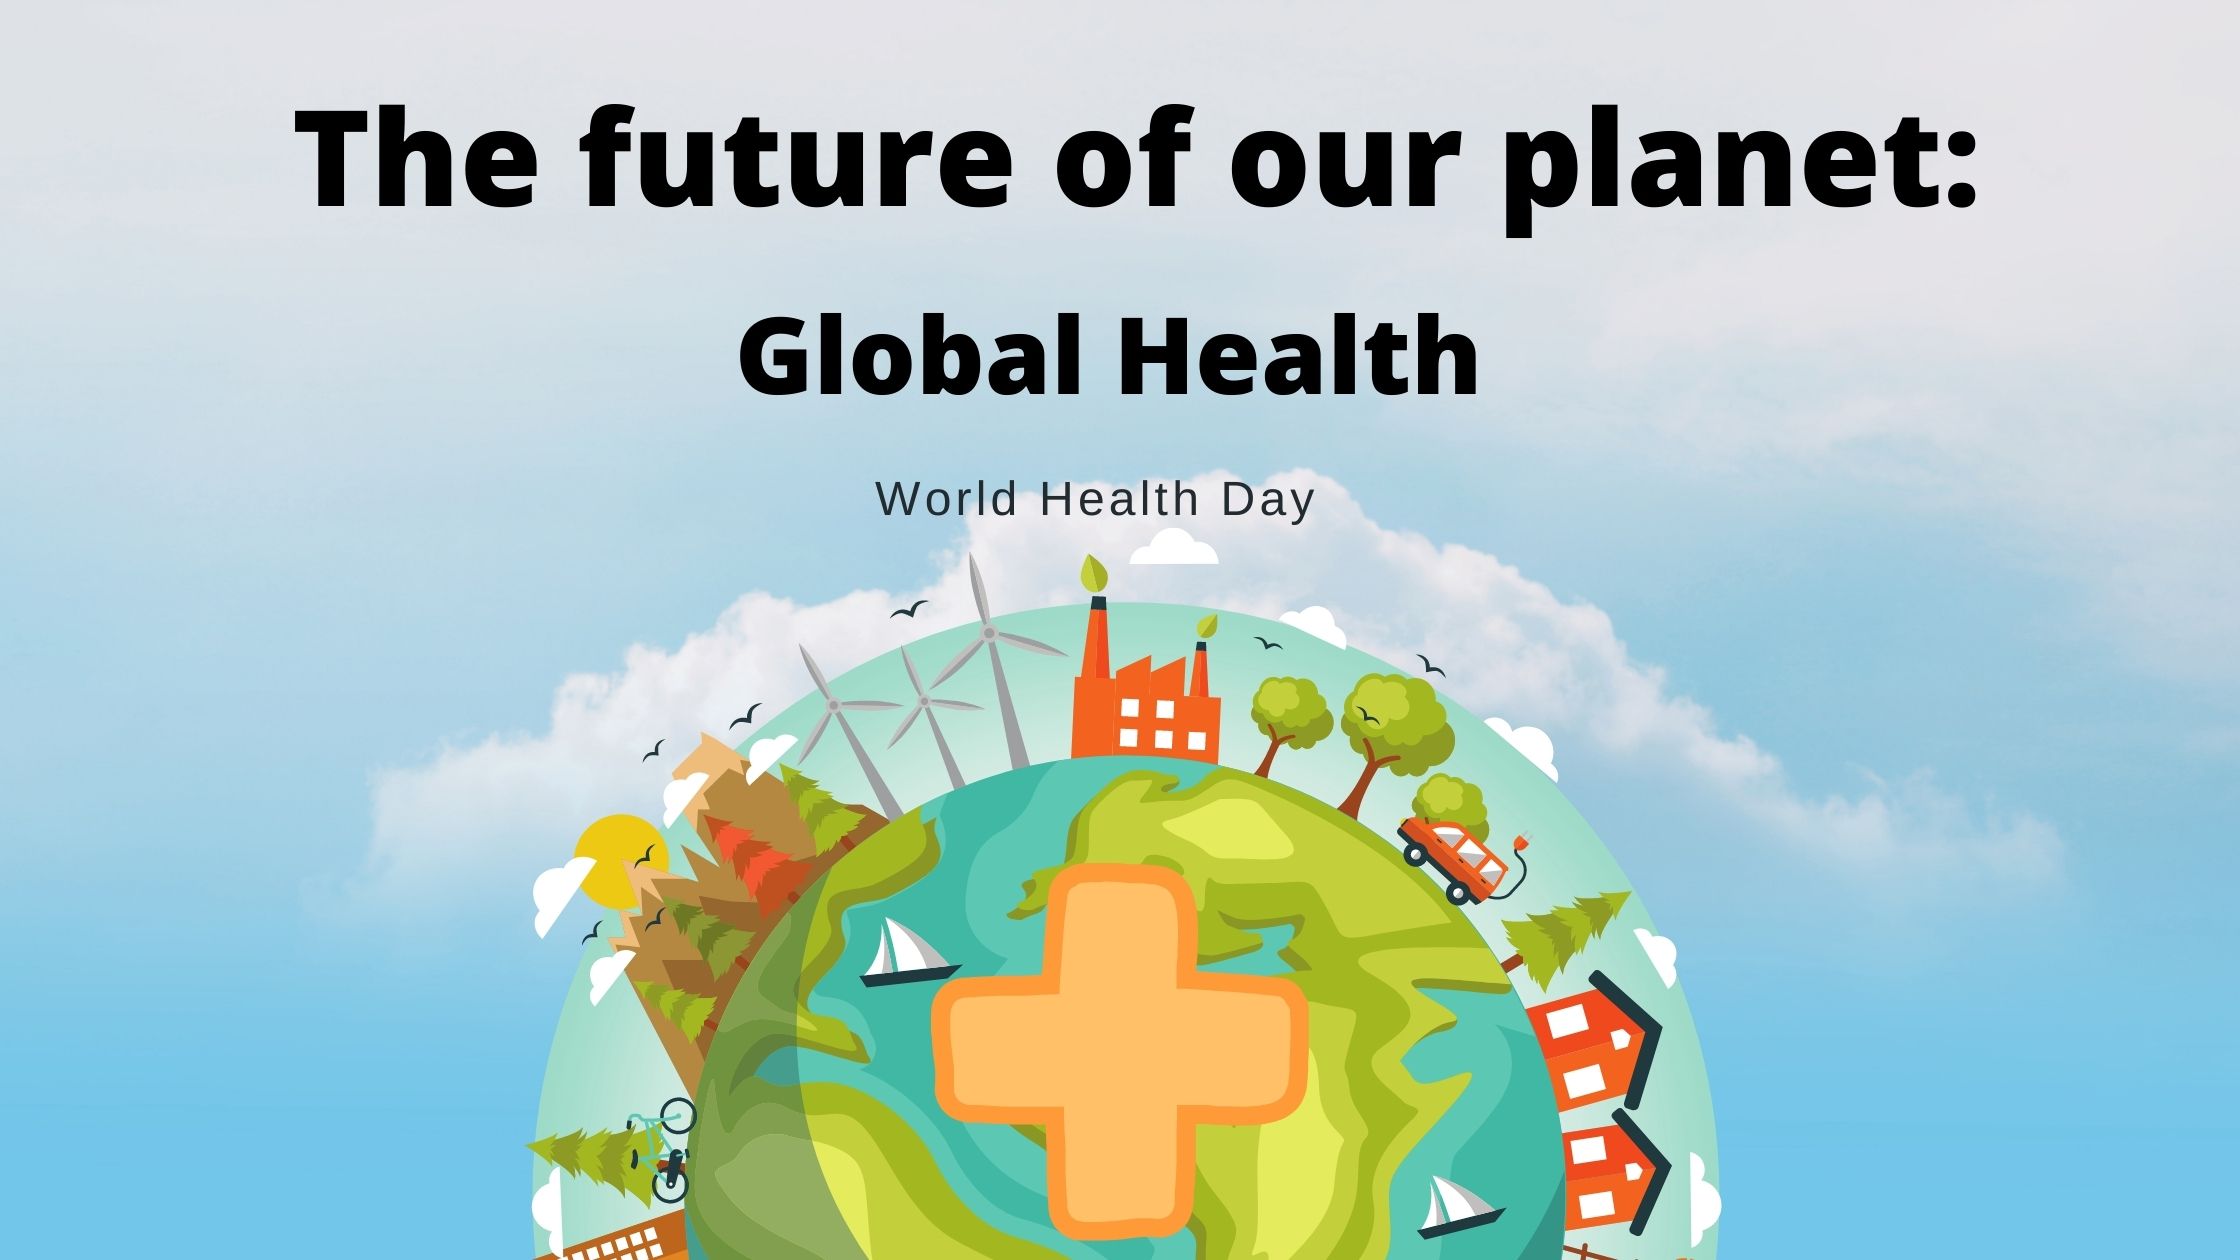 The future of our planet: Global Health